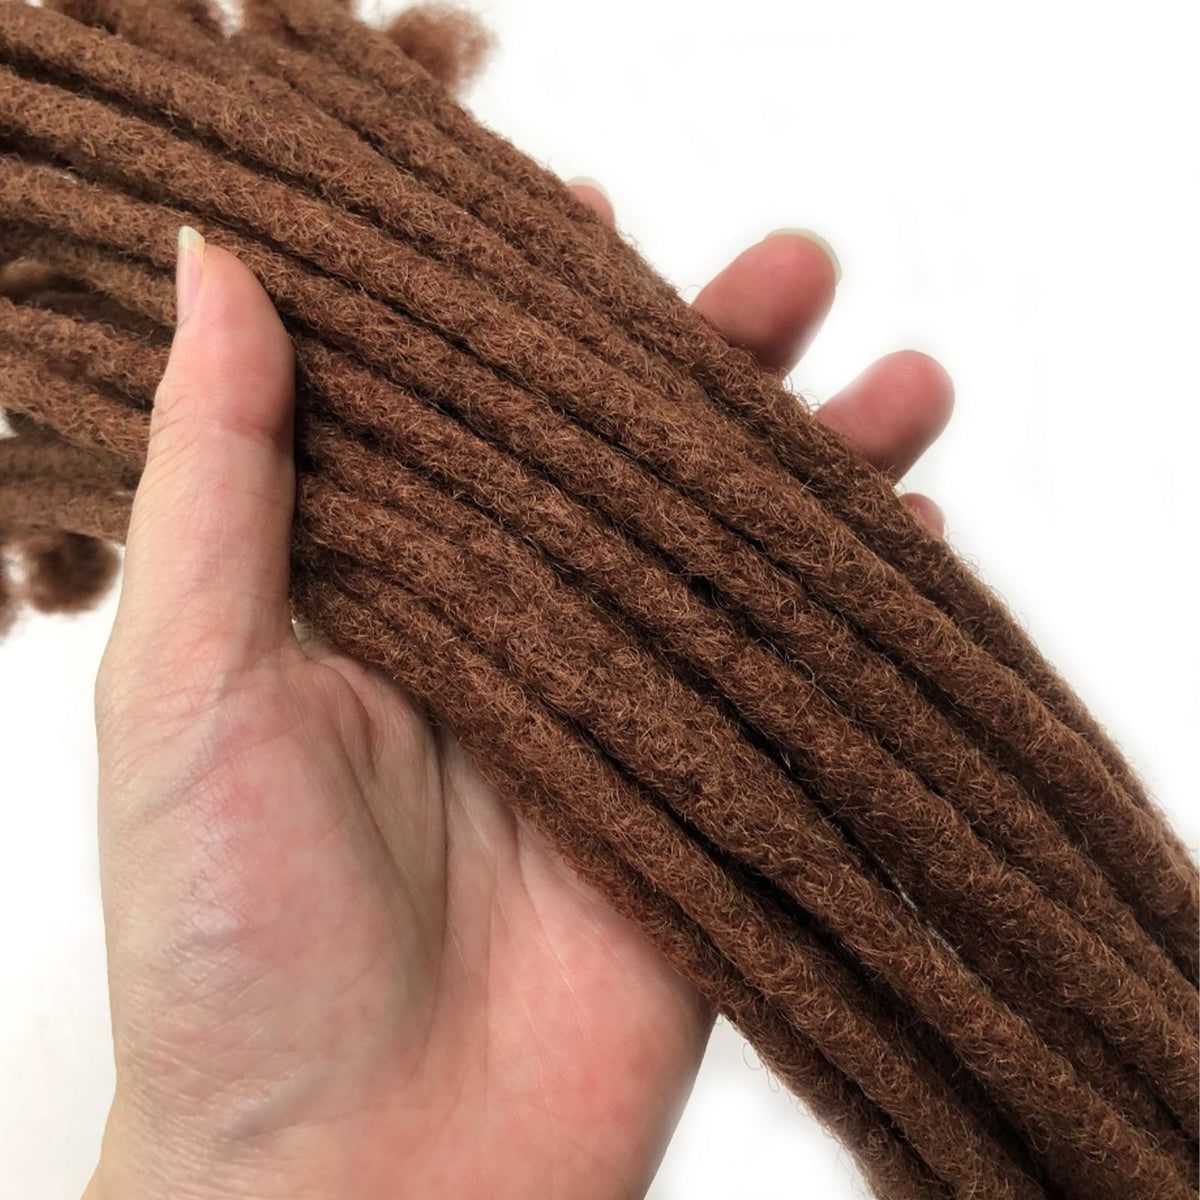 100% Human Hair Dreadlock Extensions 8 Inch 10 Strands Handmade Natural Loc Extensions Human Hair Bundle Dreads Extensions For Woman & Men Can Be Dyed/Bleached  (8 Inch 10 Strands, 0.8cm #33)